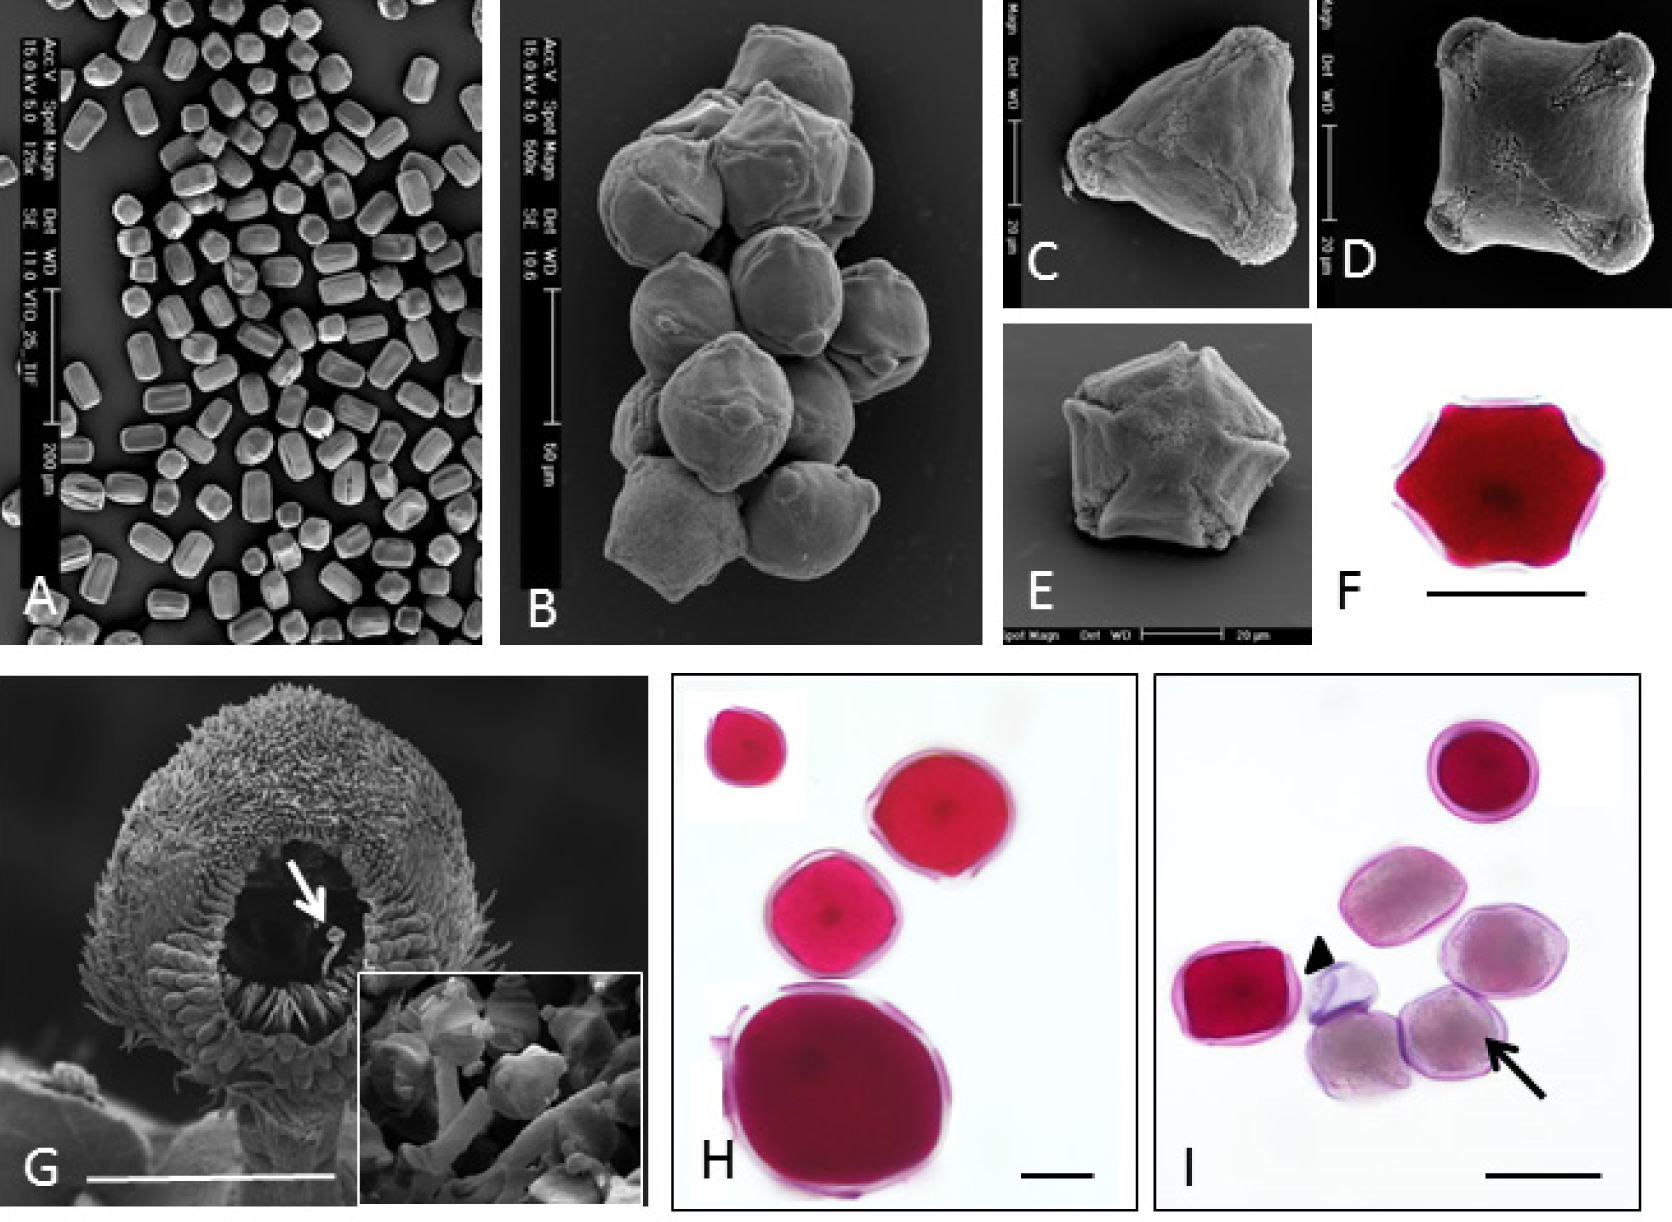 Fig. 1. Pollen heteromorphism, stainability and germination in metallophytes of sect. Melanium. SEM (A-E, G) and LM (F, H, I) micrographs. Pollen morphs isolated from one flower of Viola tricolor from non-metalliferous (A) and metalliferous (B) sites; 3-aperturate (C), 4-aperturate (D) and 5-aperturate (E) pollen of V. tricolor from metallicolous population; 6-aperturate pollen of V. albanica (F); pollen germination (arrow and magnification) at stigma of V. raunsiensis (G); different sizes of stainable pollen (Alexander test) in V. albanica × V. dukadjinica (H); non-stainable normal-size (arrow) and dwarf empty (arrowhead) pollen of V. dukadjinica (I). Bars in A = 200 µm, in B, F, I = 50 µm, in C-E, H = 20 µm, in G = 500 µm.